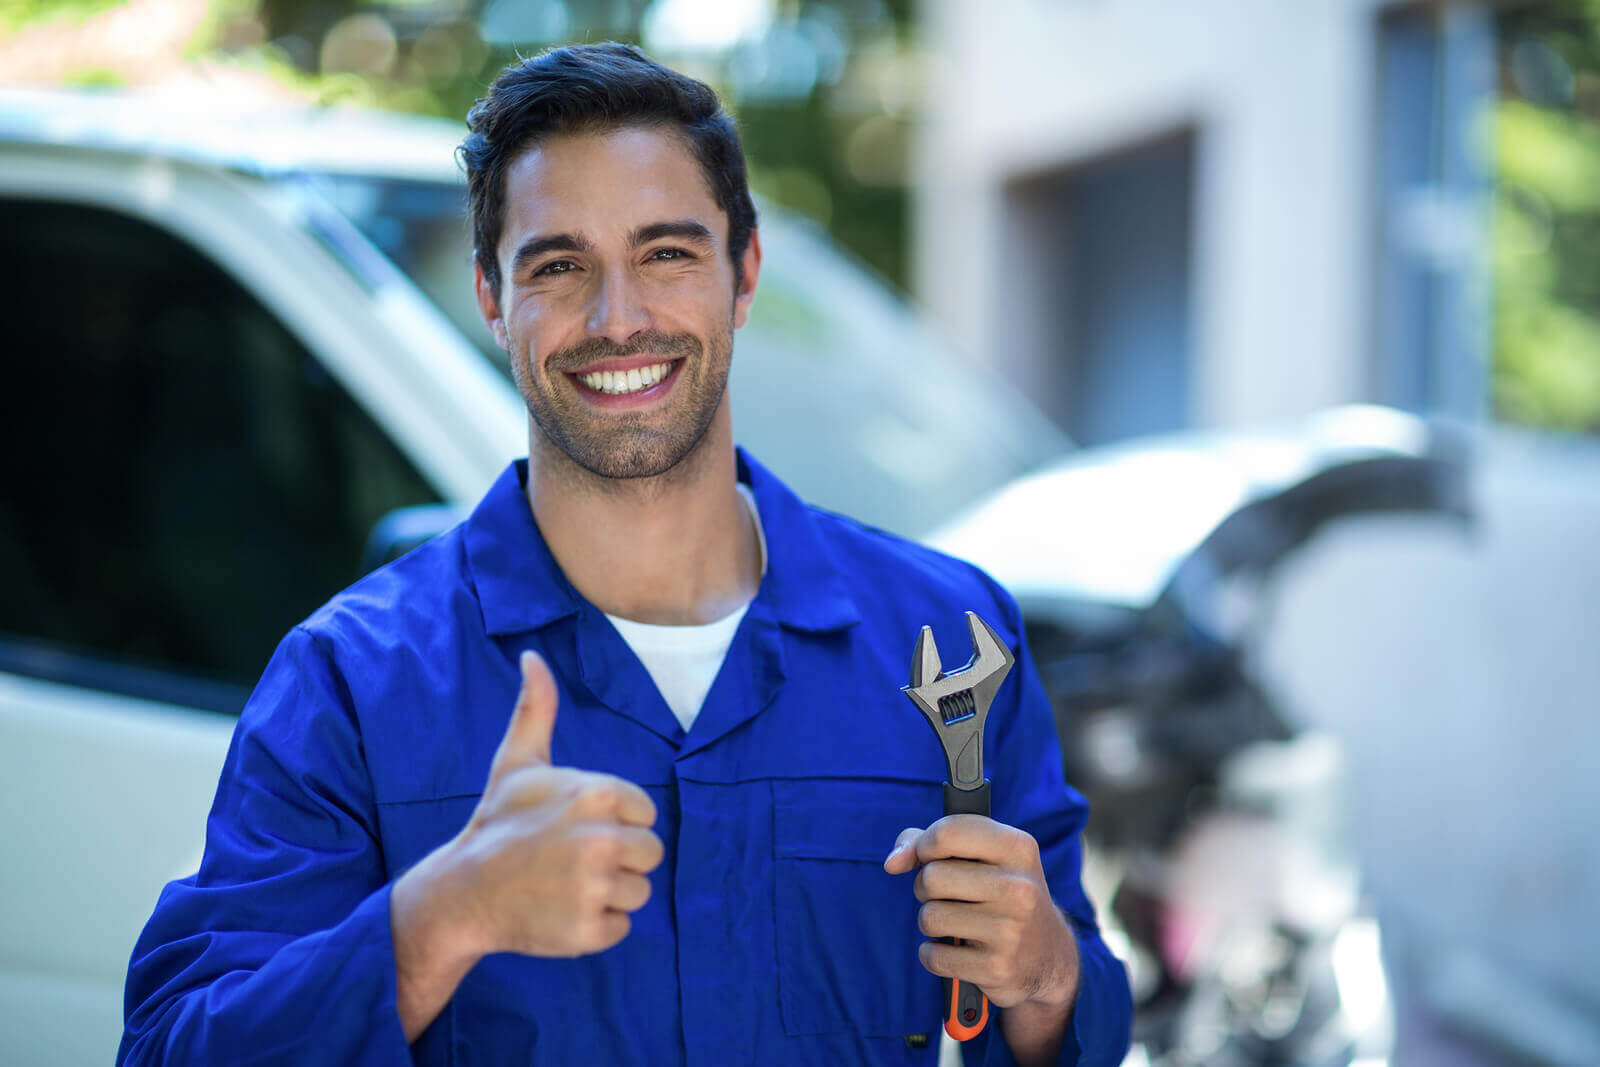 A mechanic holding a wrench giving a thumbs up